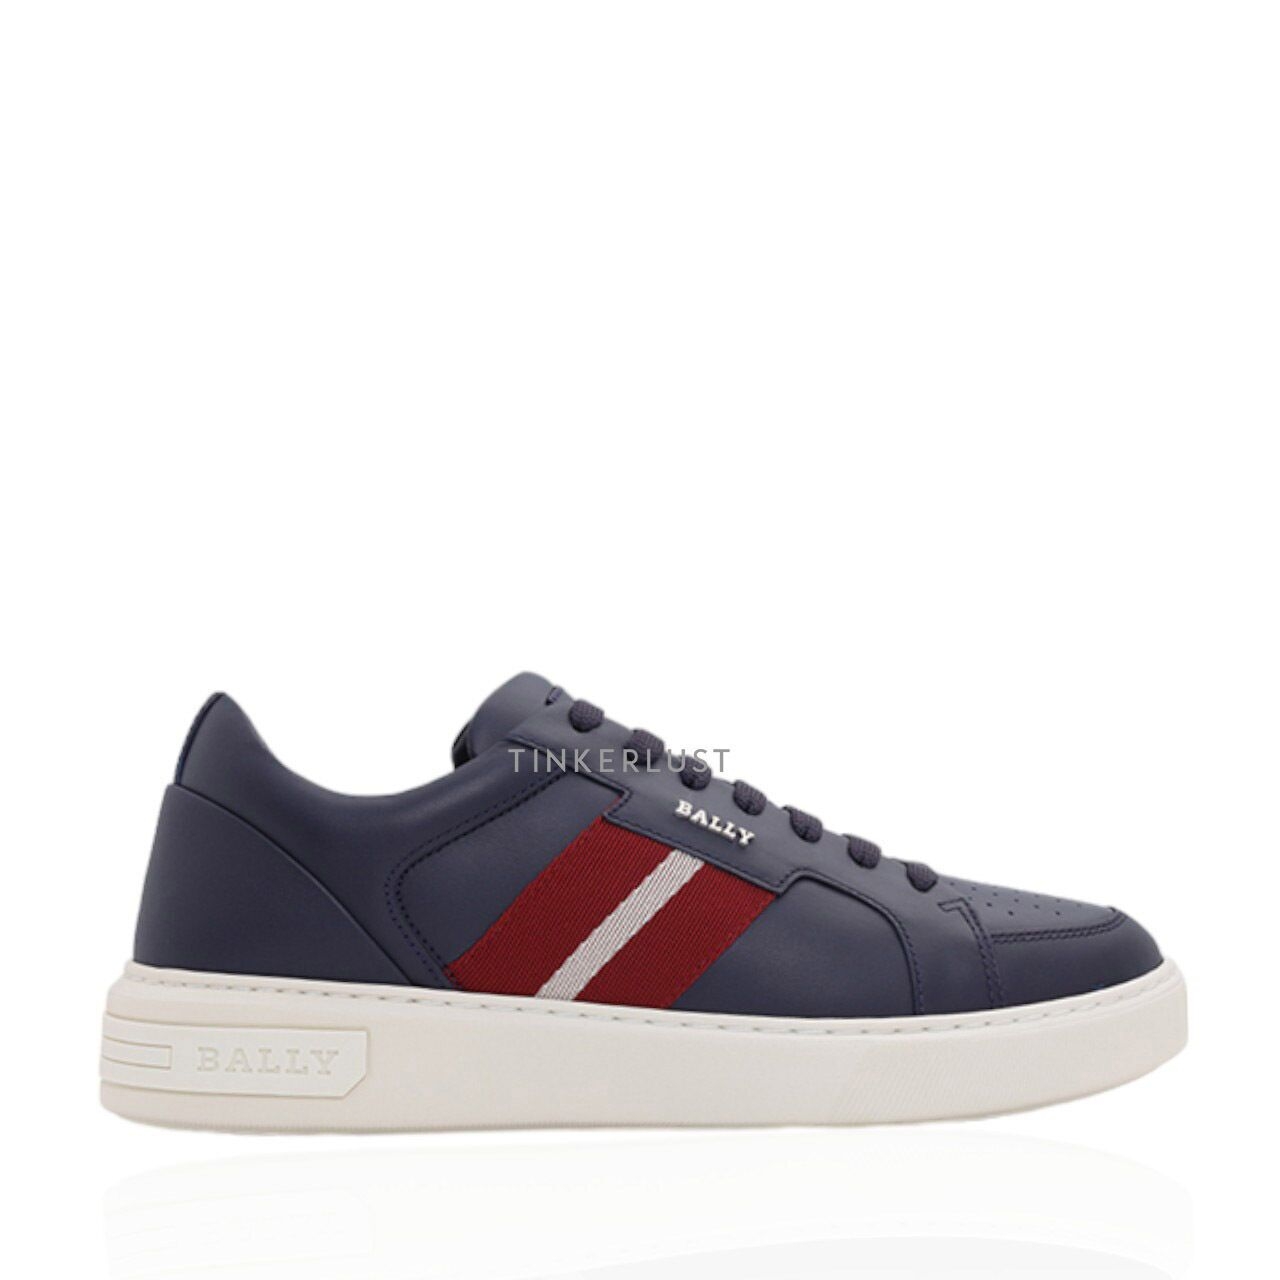 Bally Men Moony Sneakers in Ink Leather with Striped